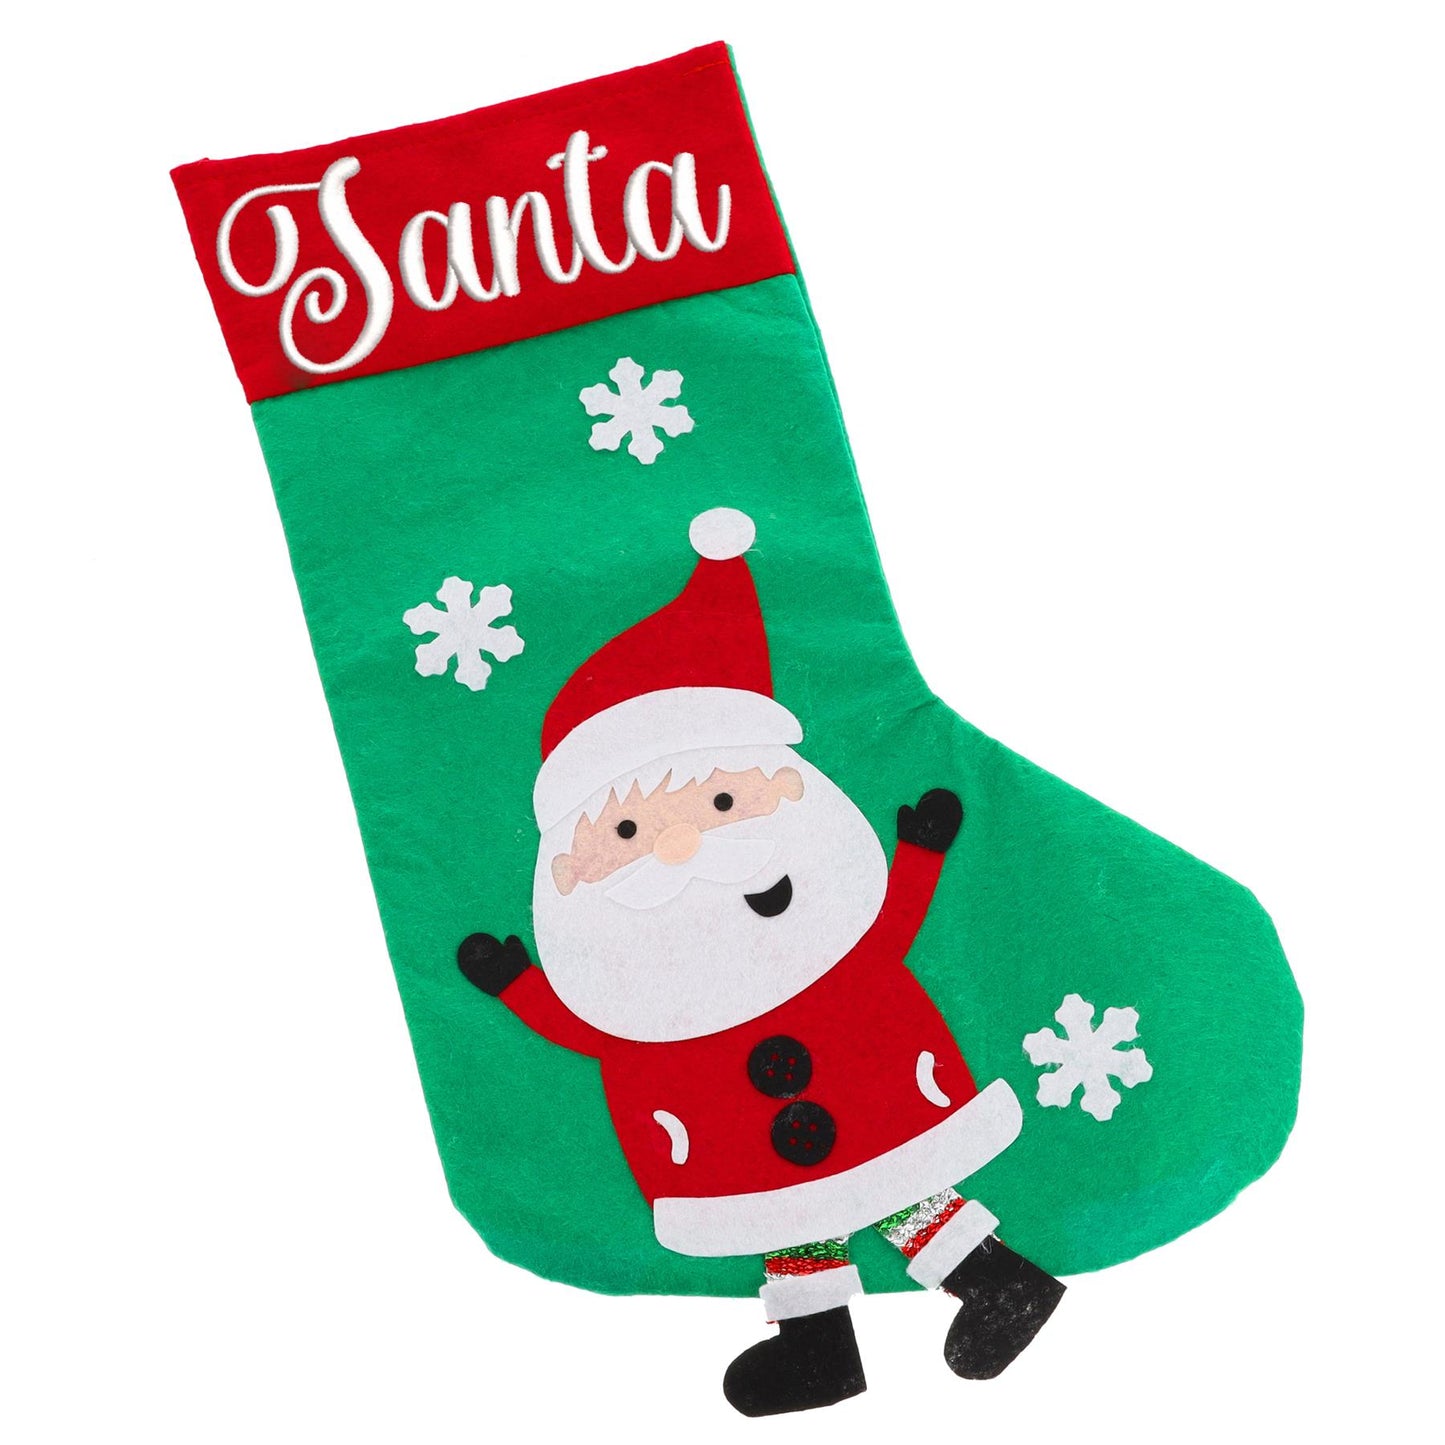 Embroidered Personalised Christmas Stocking With Santa Or Elf Design  - Always Looking Good - Santa  